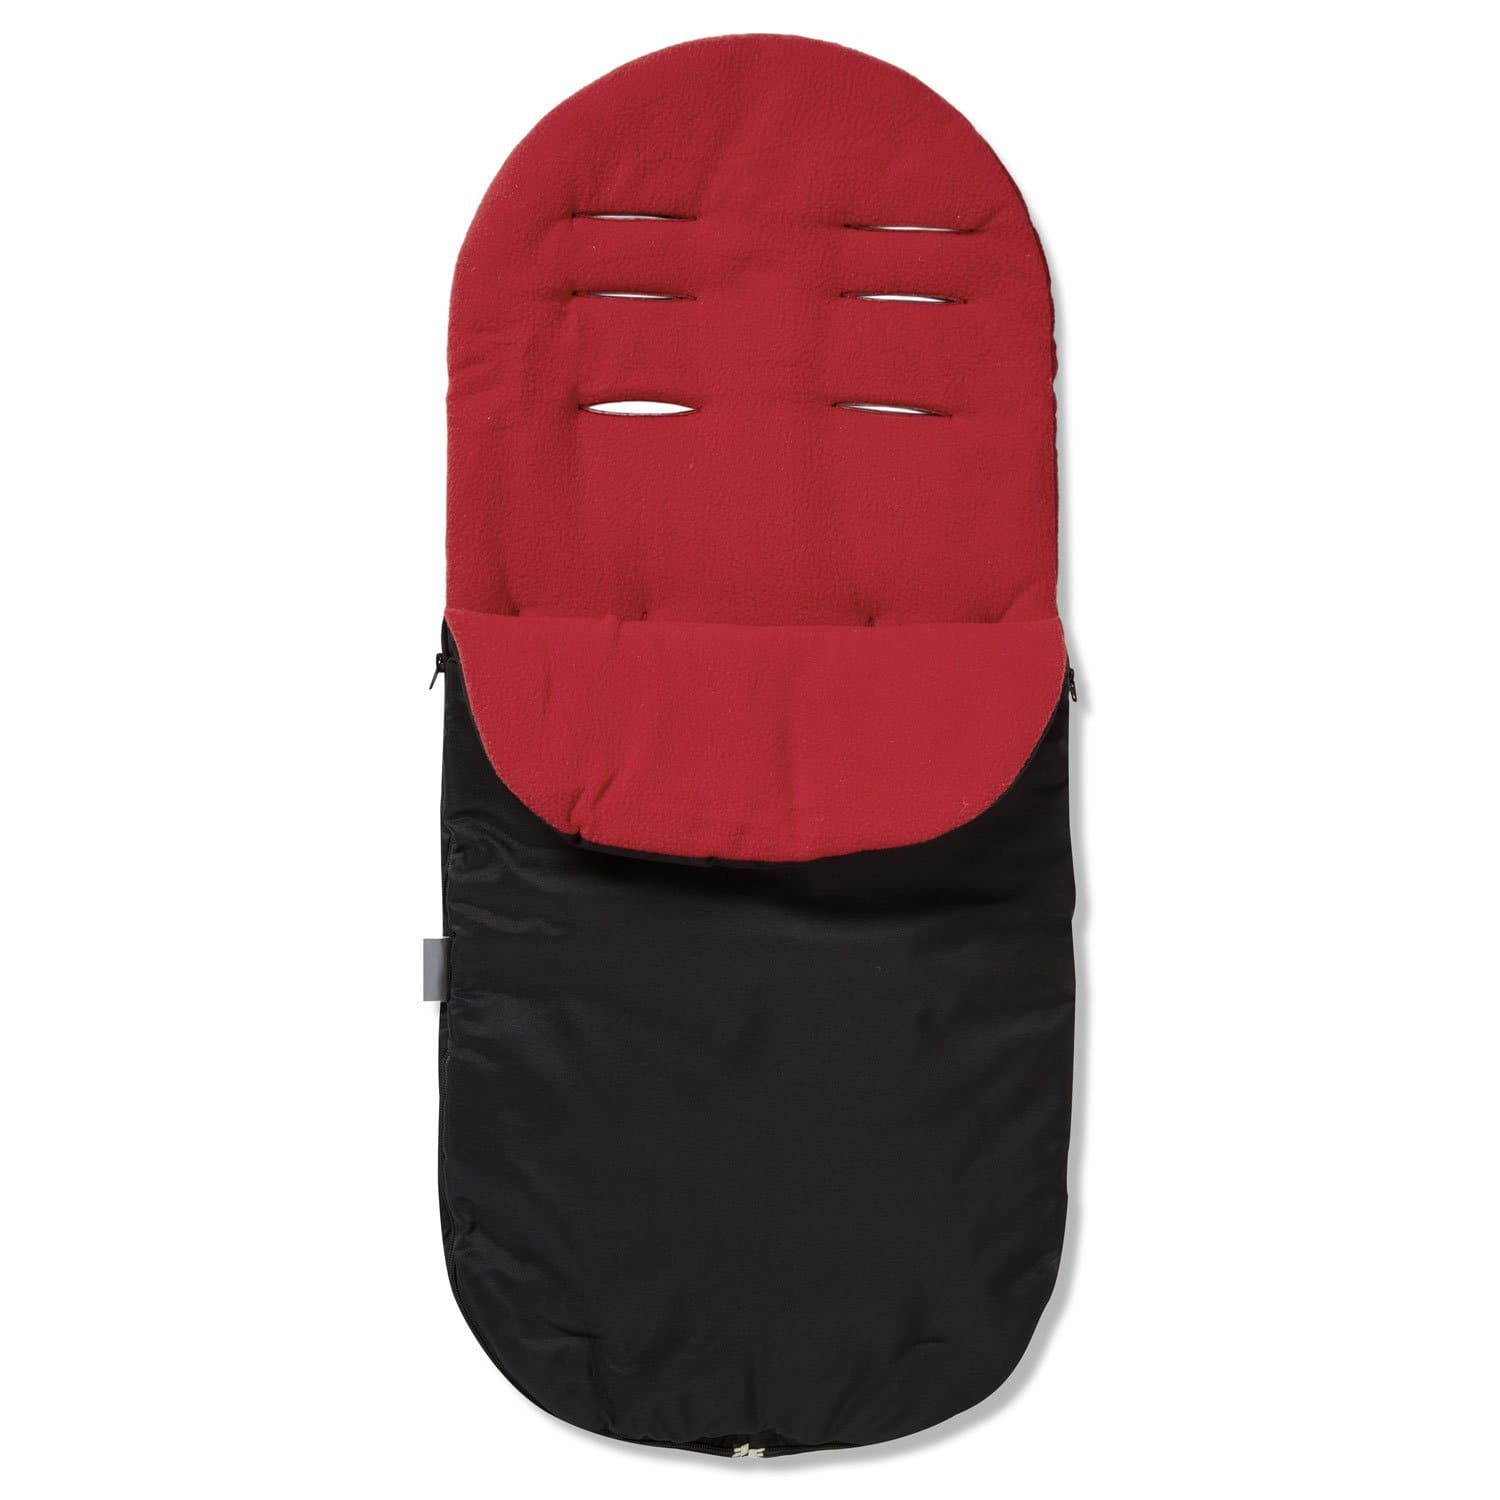 Footmuff / Cosy Toes Compatible with Emmaljunga - Red / Fits All Models | For Your Little One